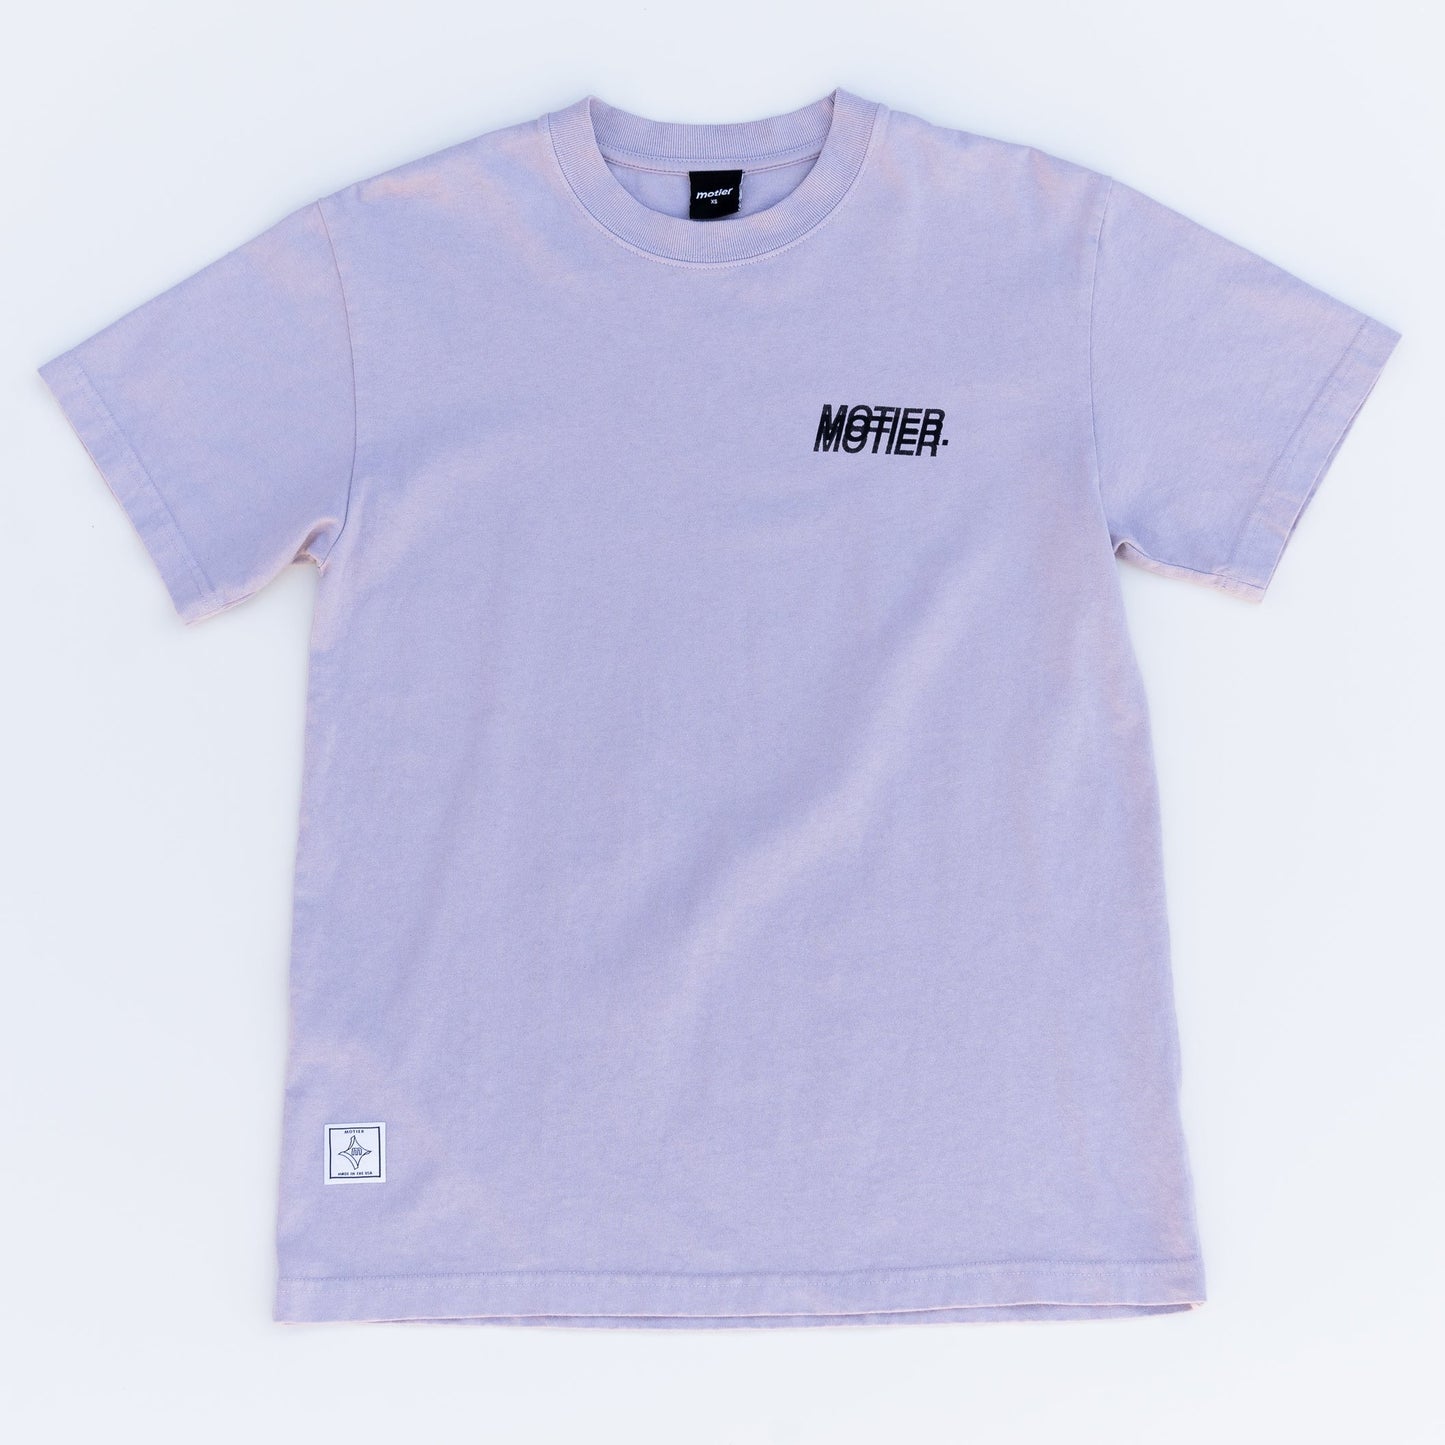 The Blurr Holographic Luxe Tee (Zinc)